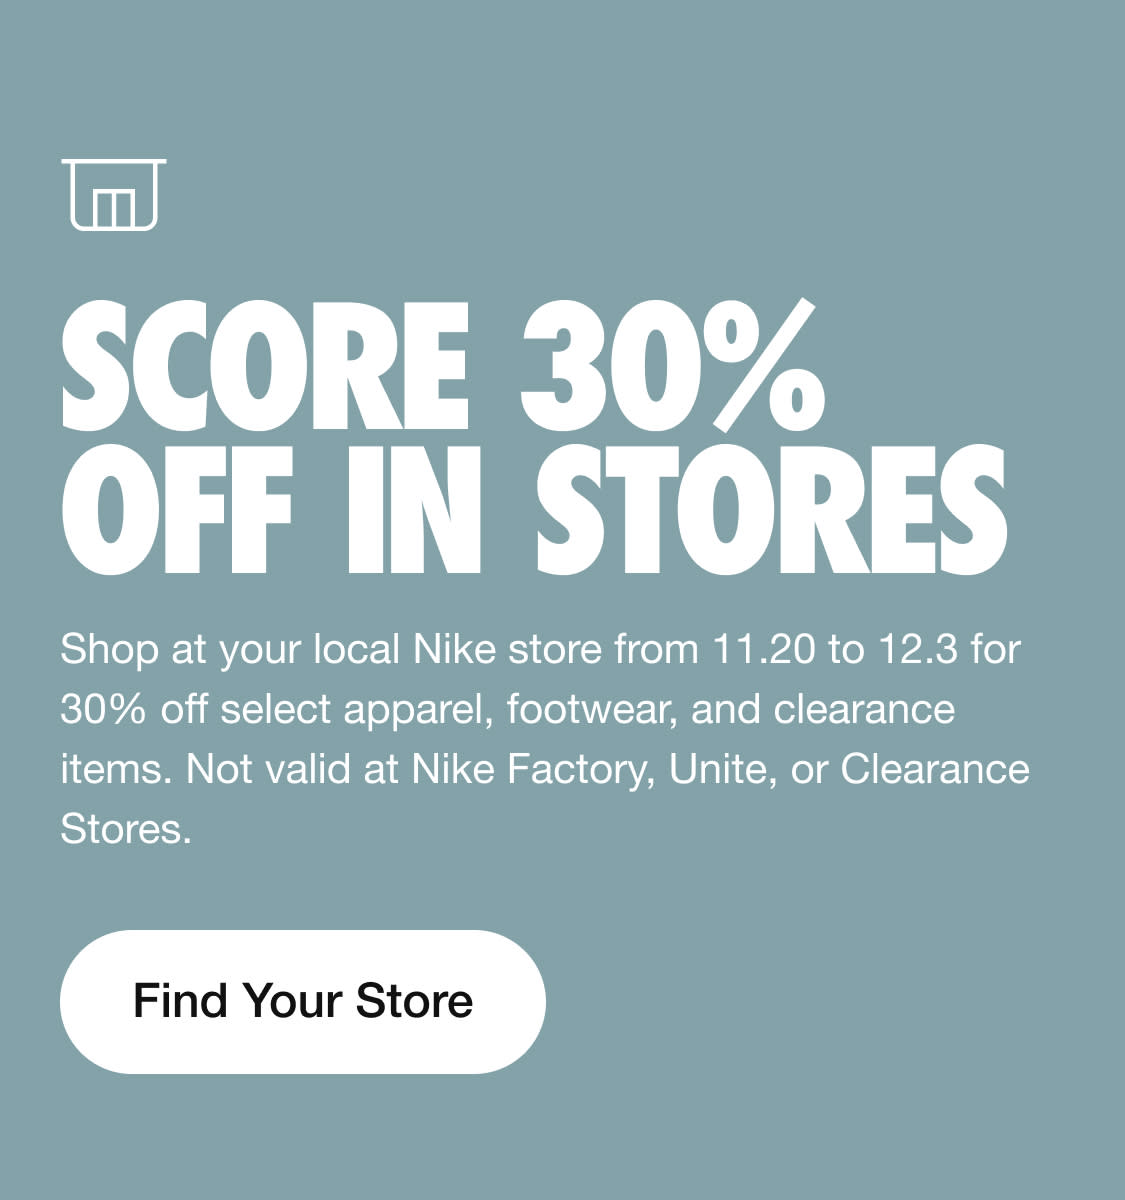 t5s1 SCORE 30% L R H Shop at your local Nike store from 11.20 to 12.3 for 30% off select apparel, footwear, and clearance items. Not valid at Nike Factory, Unite, or Clearance Stores. Find Your Store 